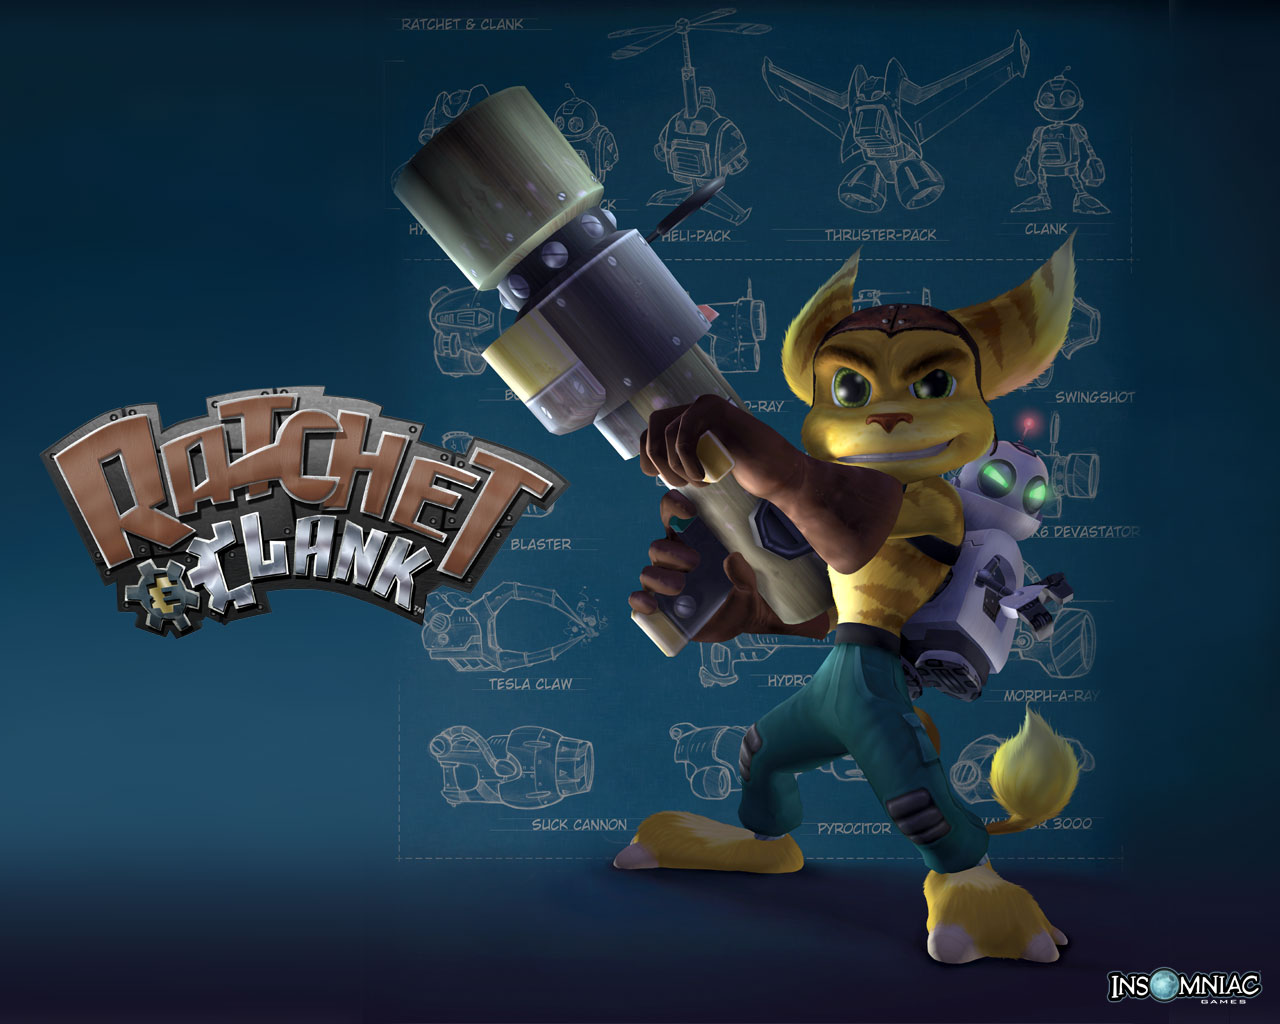 Wallpapers from Ratchet & Clank